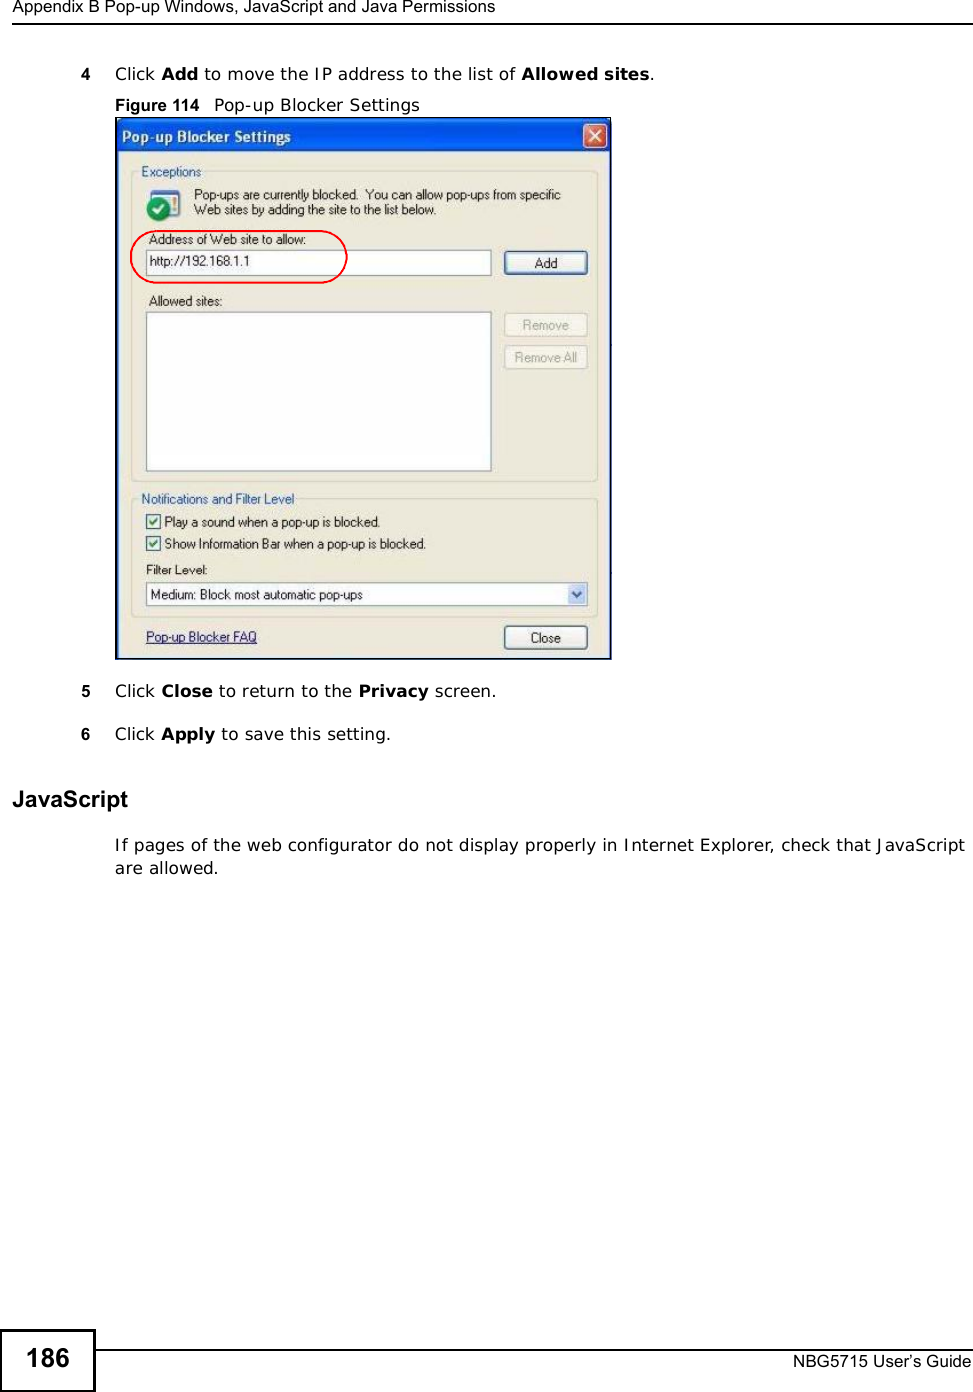 Appendix BPop-up Windows, JavaScript and Java PermissionsNBG5715 User’s Guide1864Click Add to move the IP address to the list of Allowed sites.Figure 114   Pop-up Blocker Settings5Click Close to return to the Privacy screen. 6Click Apply to save this setting. JavaScriptIf pages of the web configurator do not display properly in Internet Explorer, check that JavaScript are allowed. 